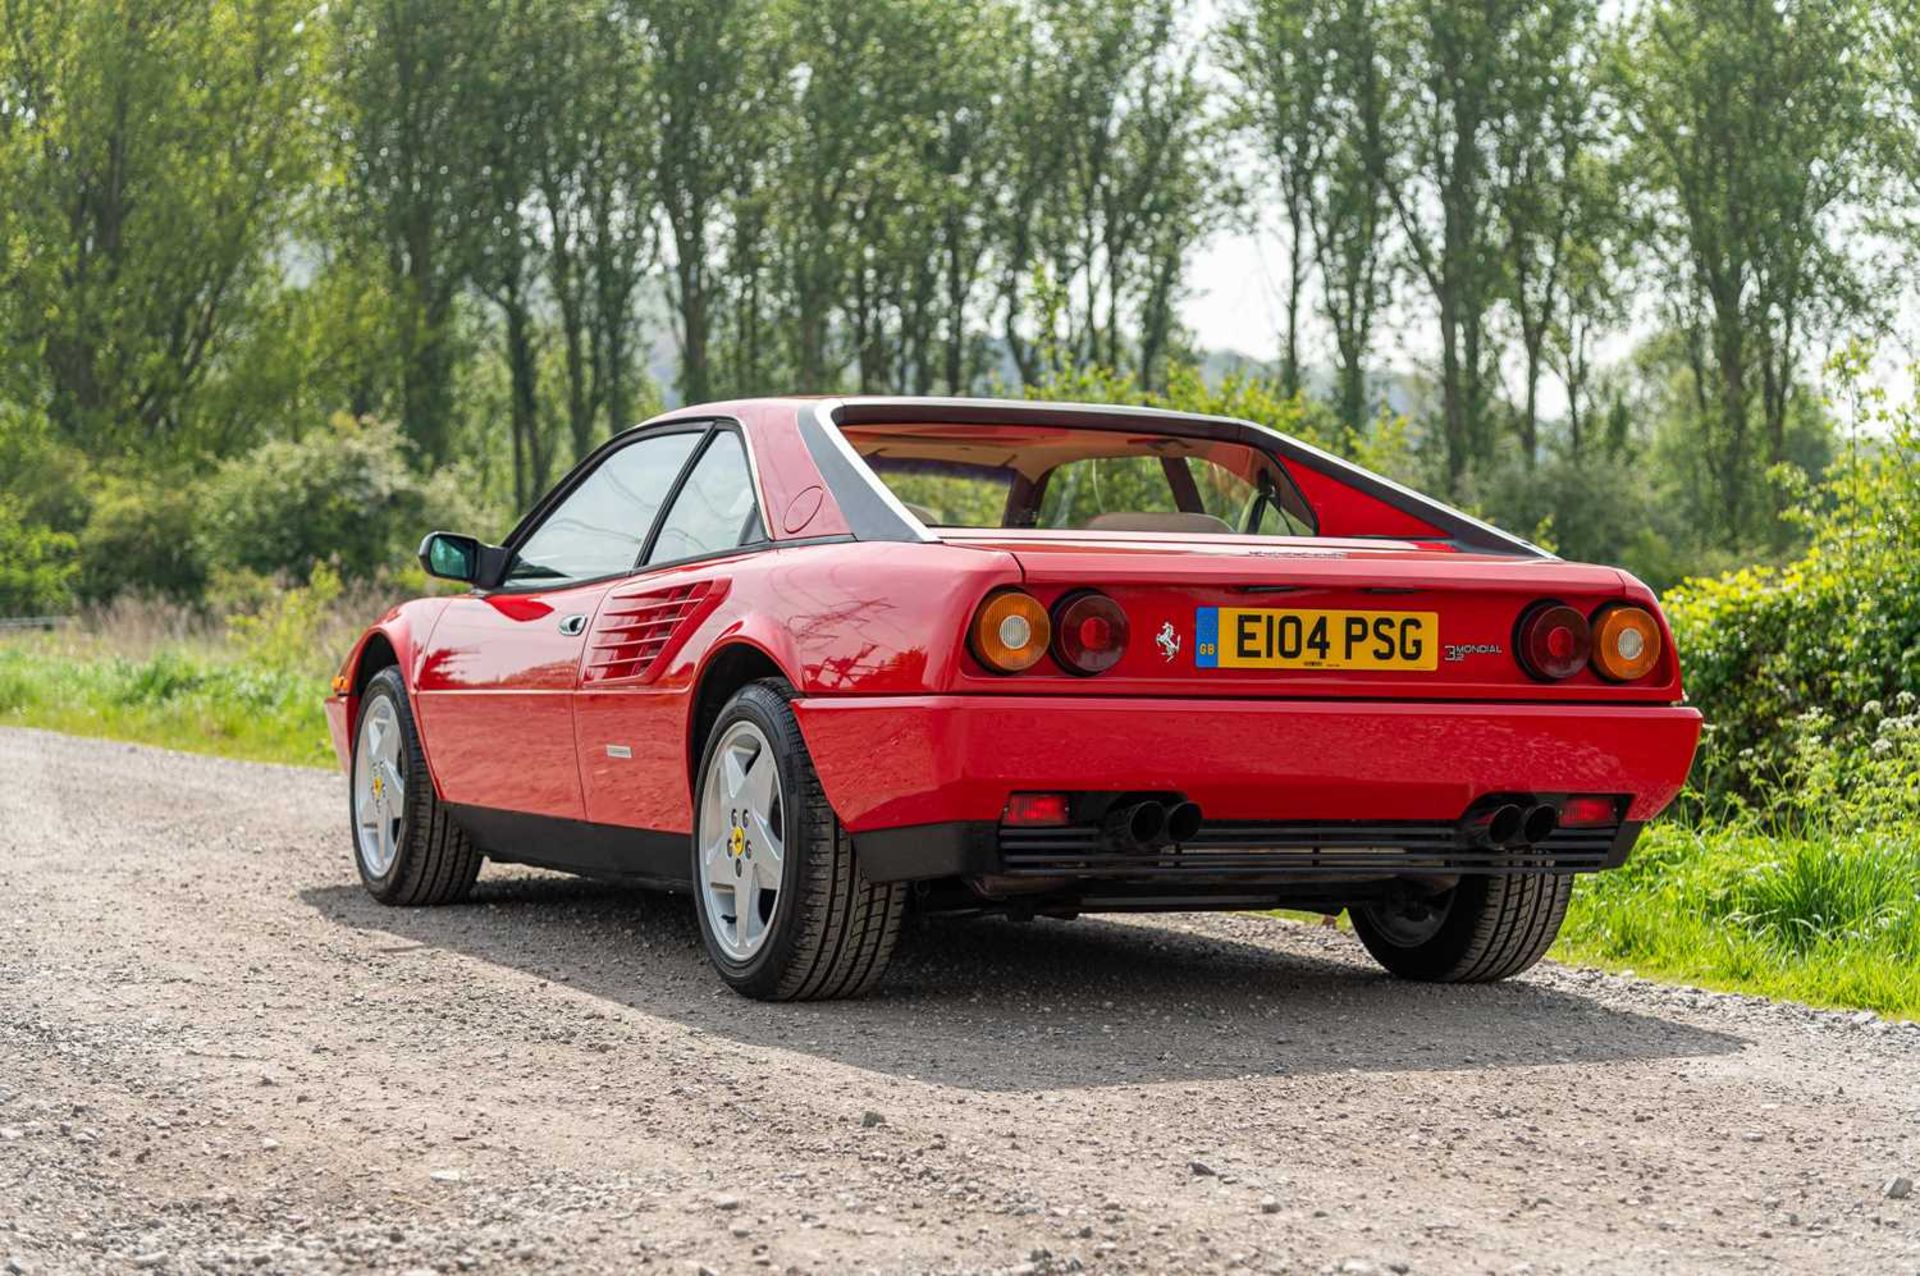 1988 Ferrari Mondial QV ***NO RESERVE*** Remained in the same ownership for nearly two decades finis - Image 10 of 91